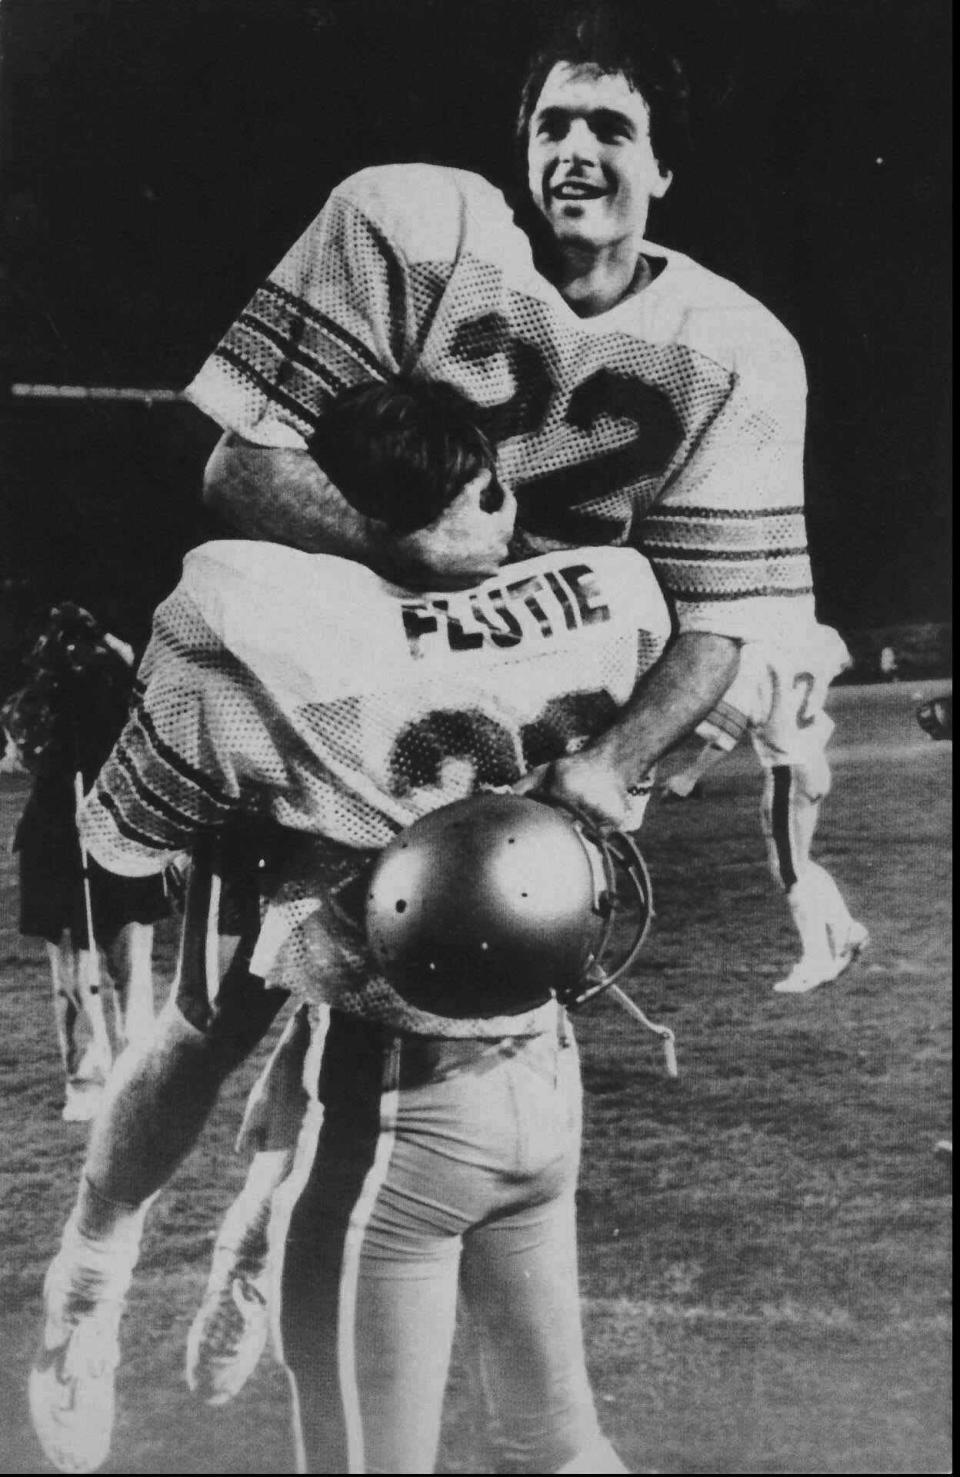 FILE - Boston College quarterback Doug Flutie rejoices in his brother Darren's arms after B.C. defeats the Miami Hurricanes with a last second touchdown pass in Miami on Nov. 23, 1984. Famous football plays often attain a legendary status with religious names like the "Immaculate Reception," the "Hail Mary" pass and the Holy Roller fumble. (AP Photo, File)